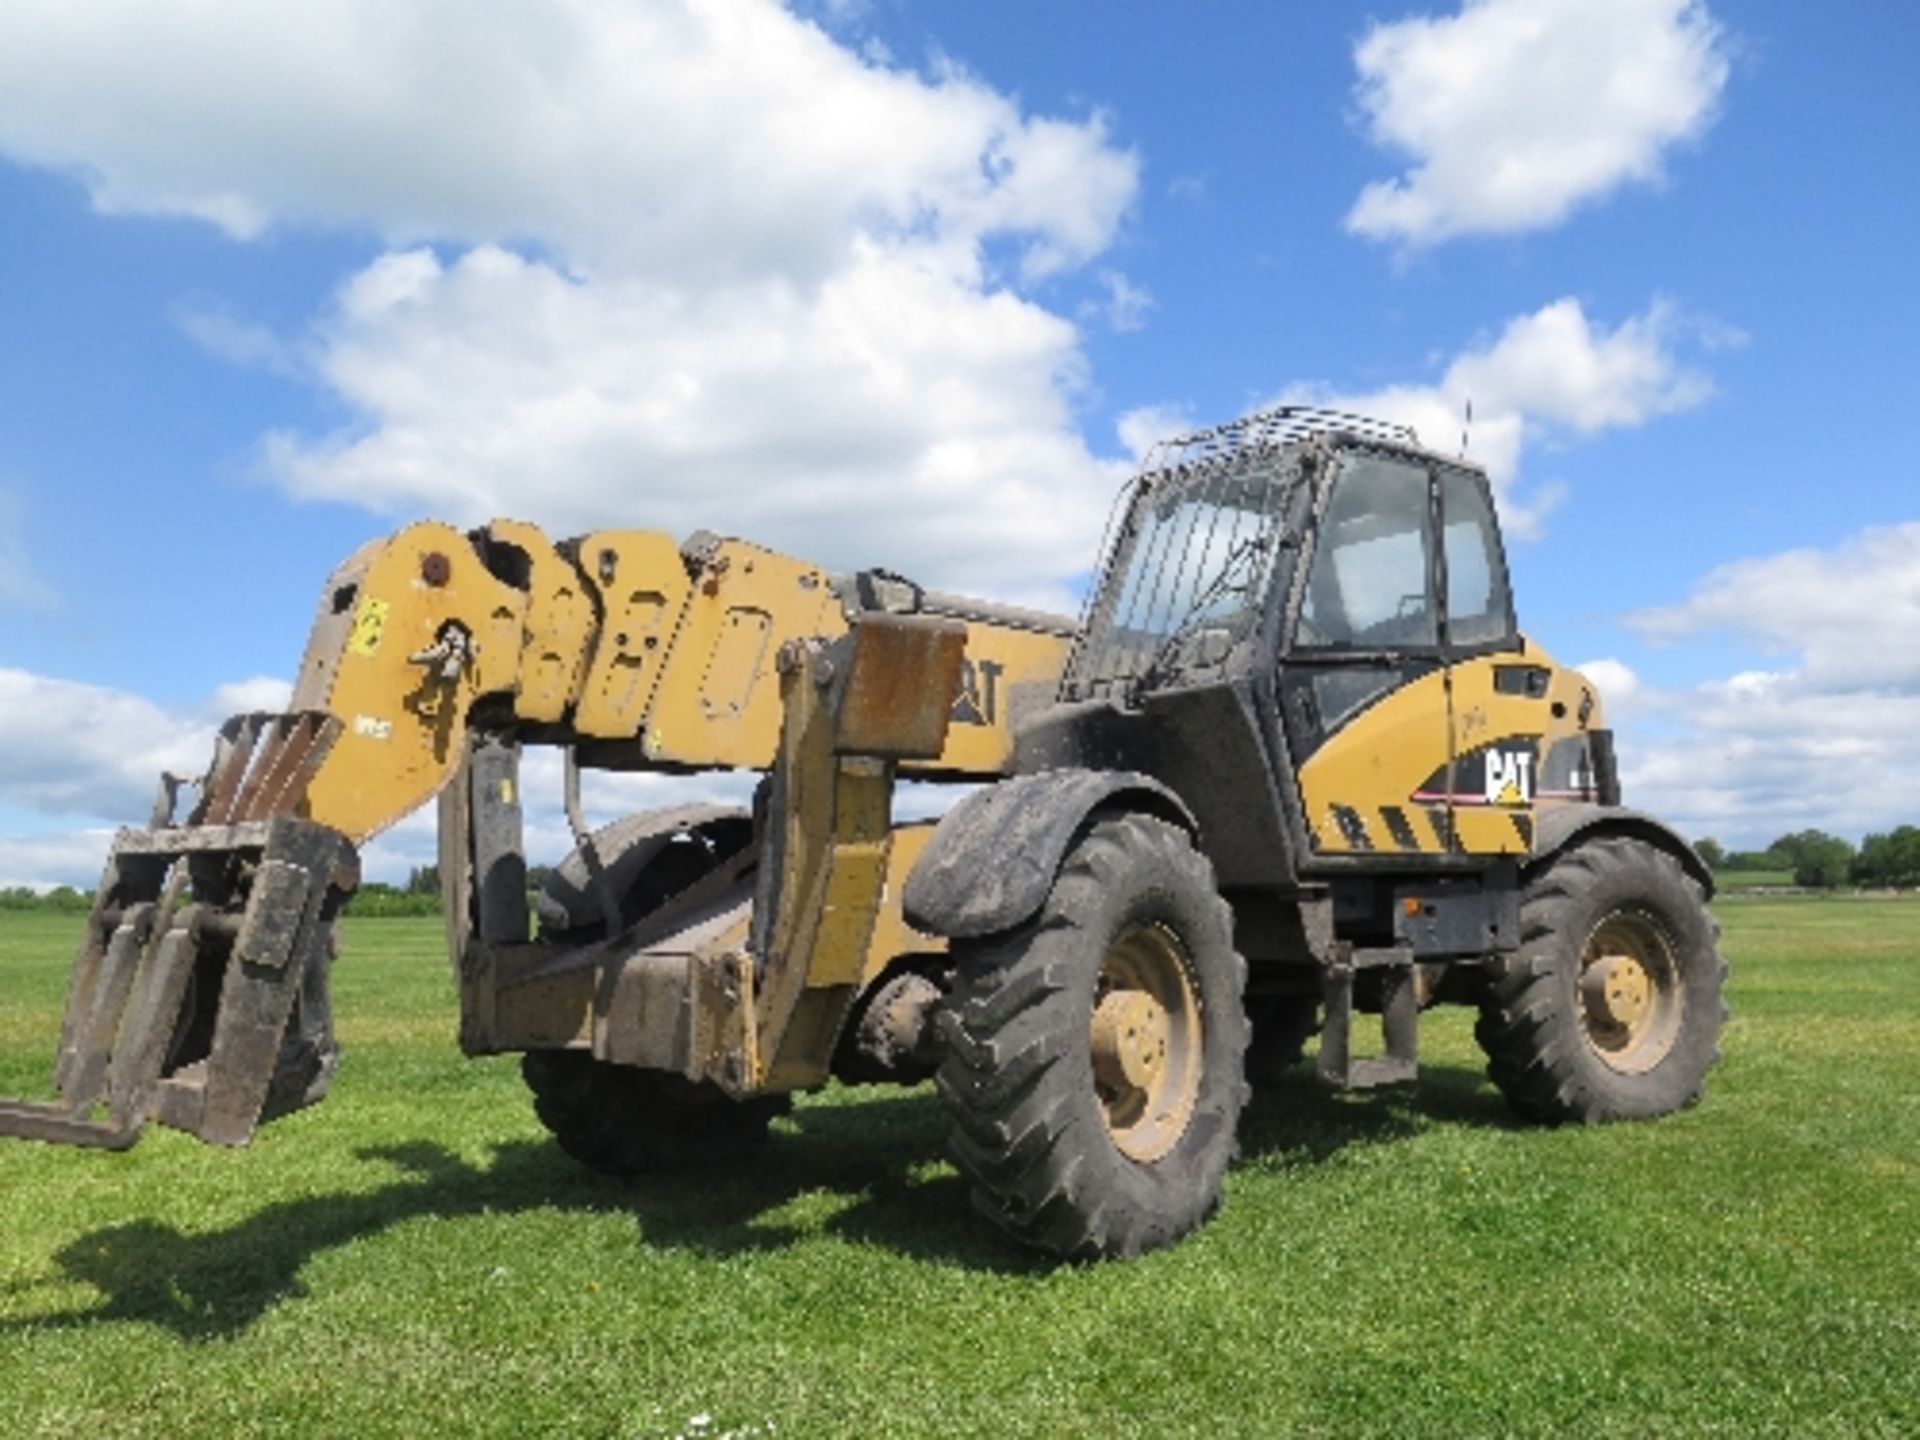 Caterpillar TH580B telehandler 7061 hrs  136316
BELIEVED 2005
POOR COSMETICS
ALL LOTS are SOLD AS